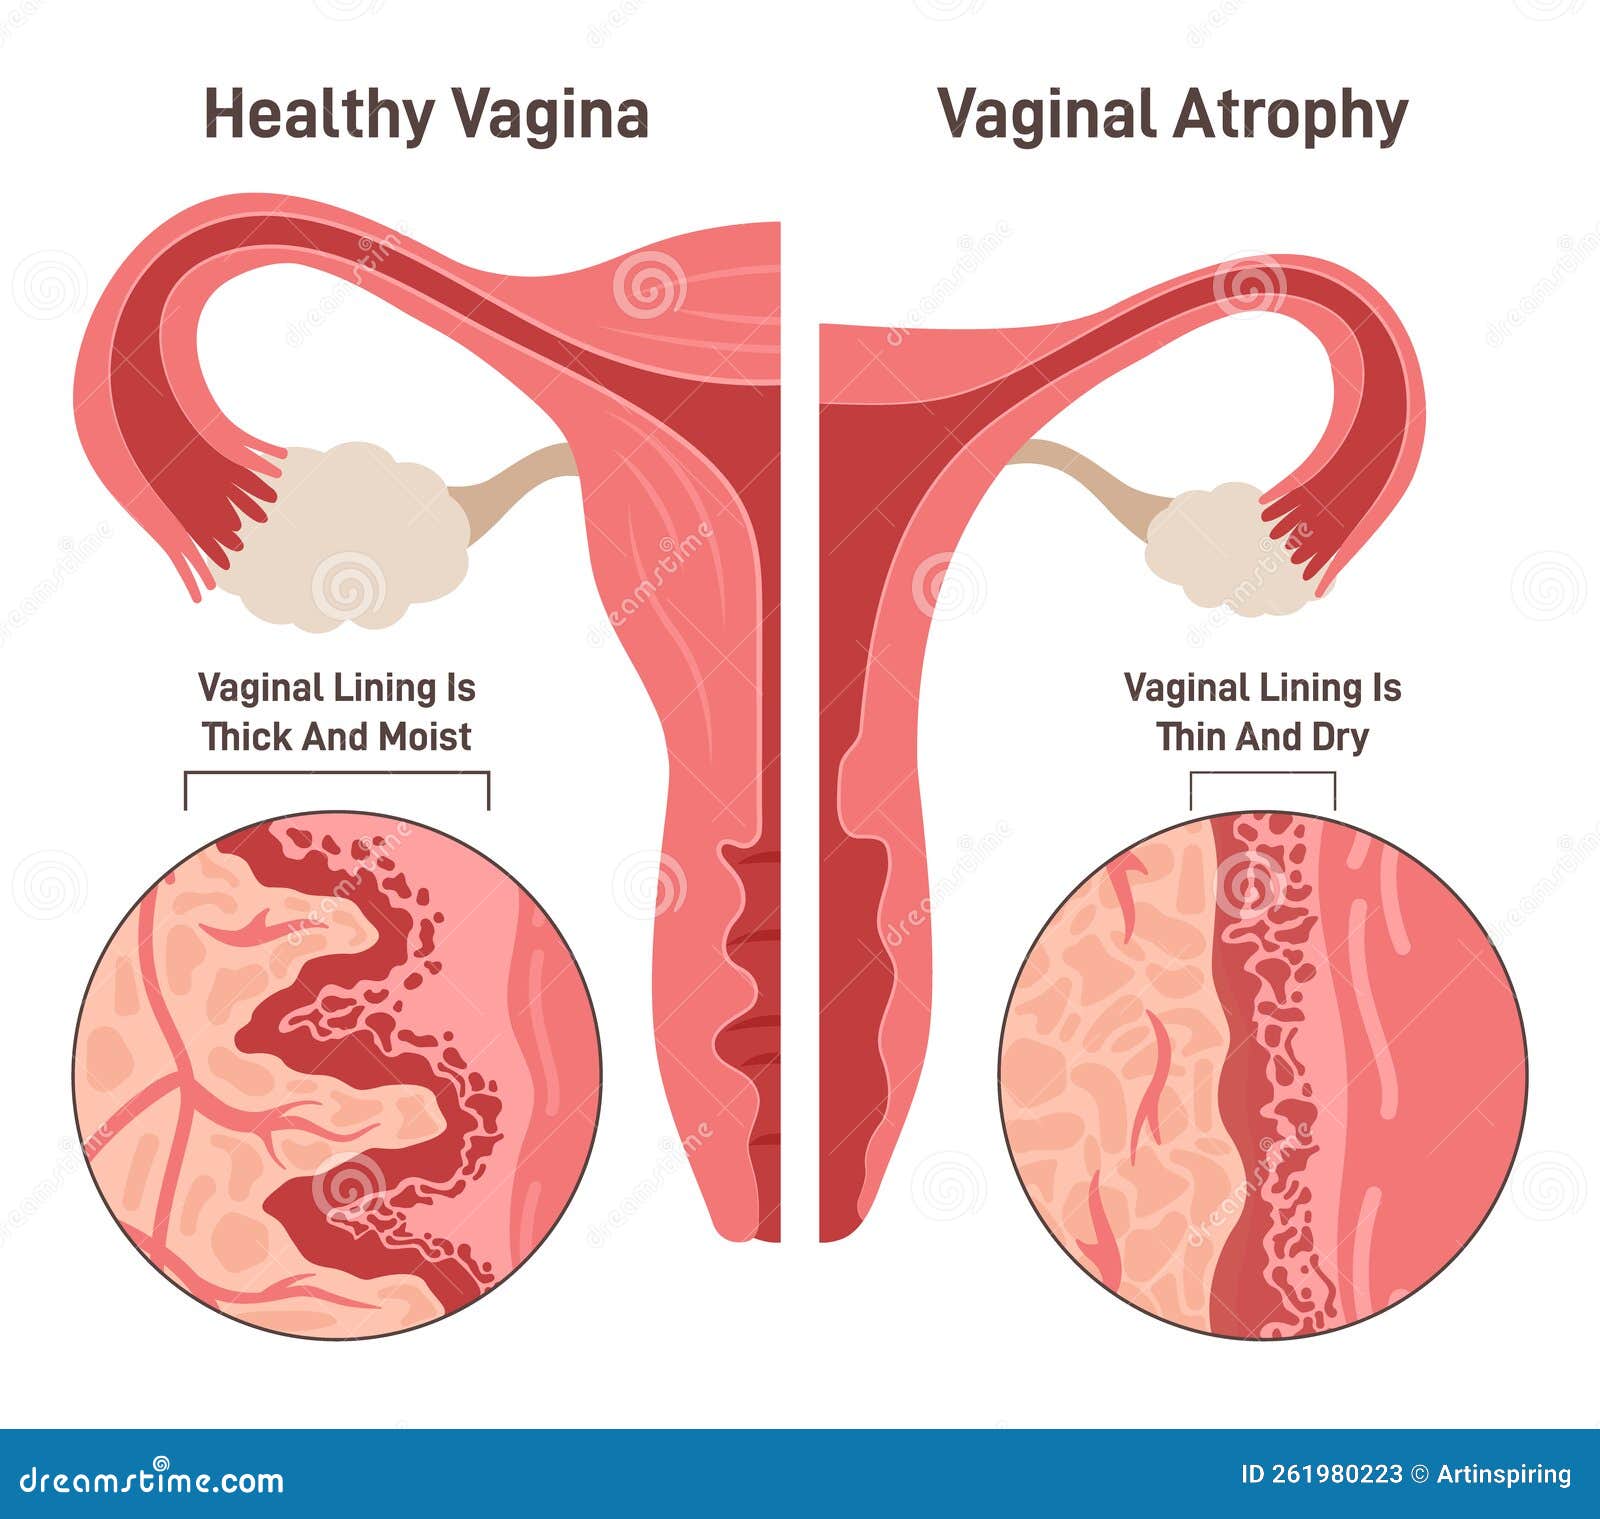 vaginal atrophy. thinning, drying and inflammation of the vaginal walls